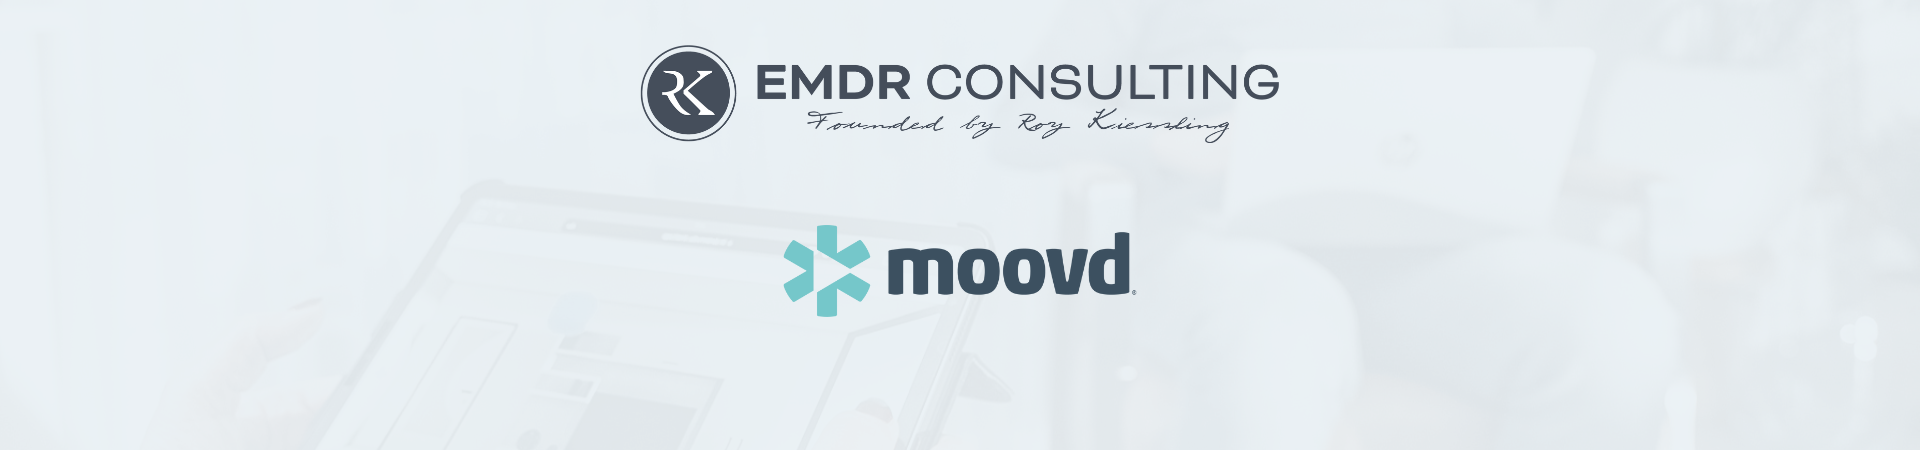 Trainers EMDR Consulting